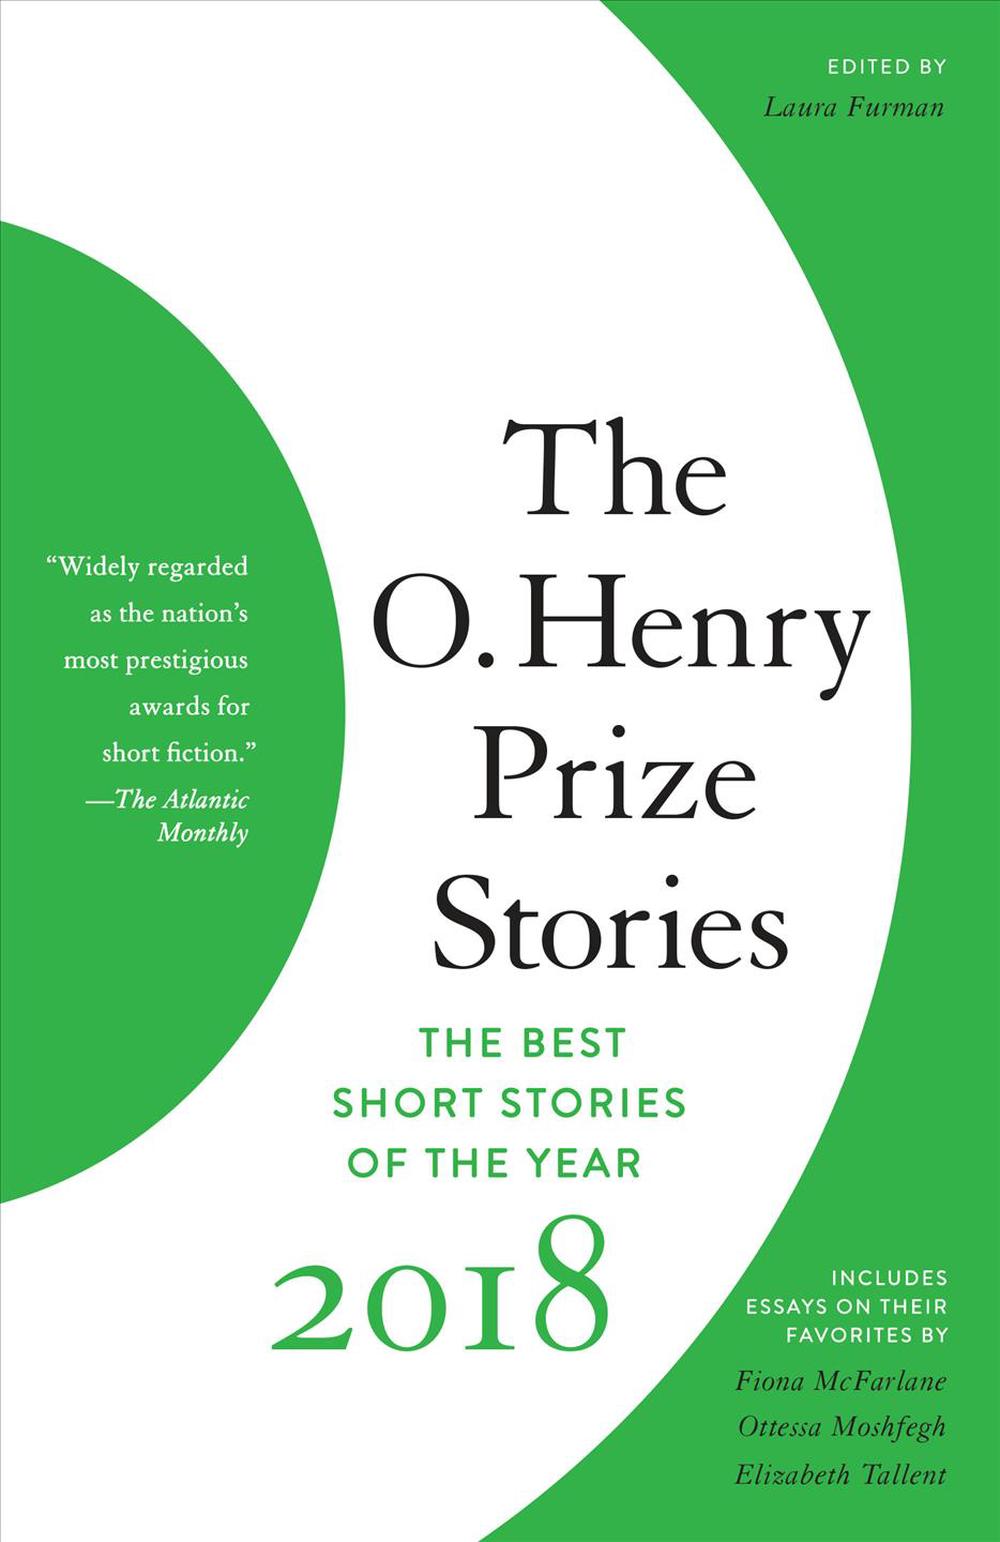 O. Henry Prize Stories 2018 by Laura Furman, Paperback, 9780525436584